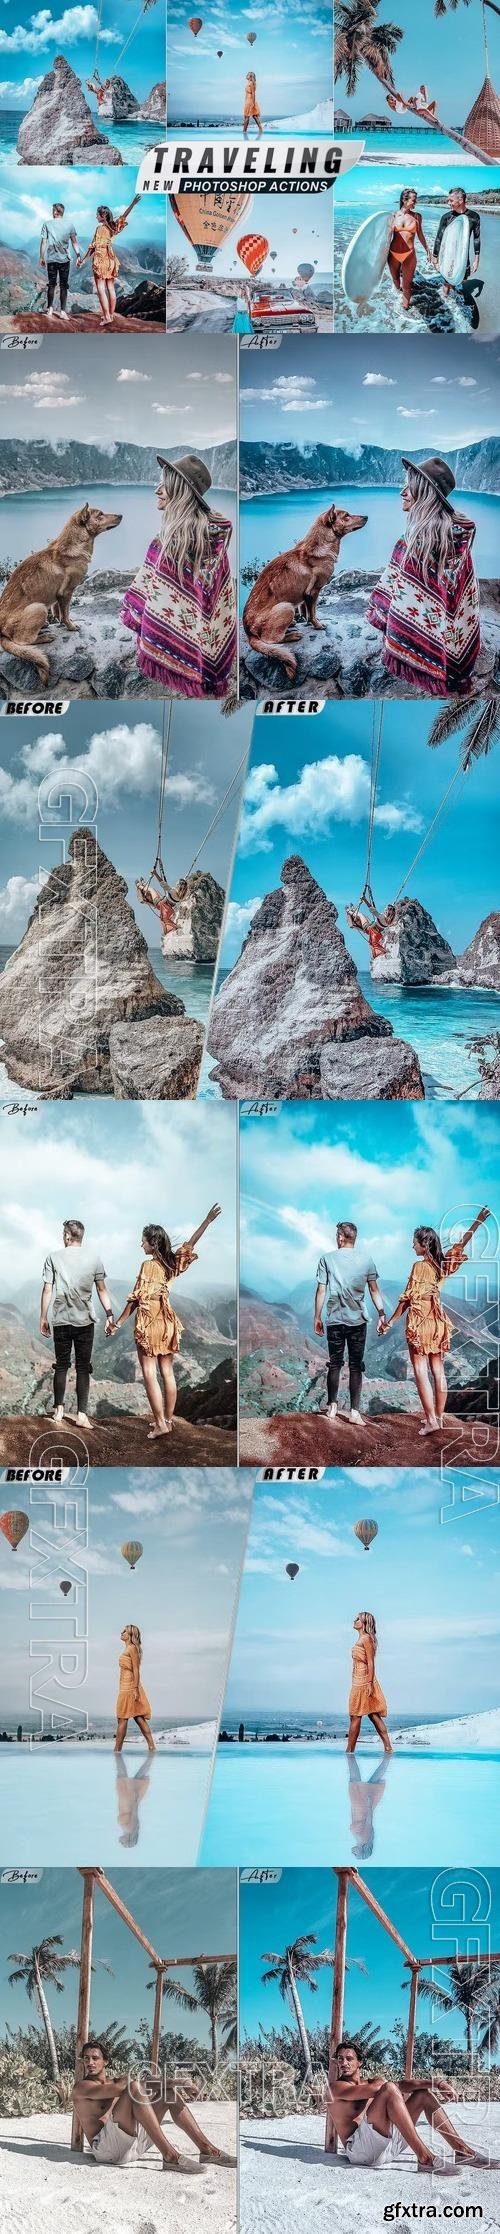 Travel insta Photoshop Actions CWH8VPY